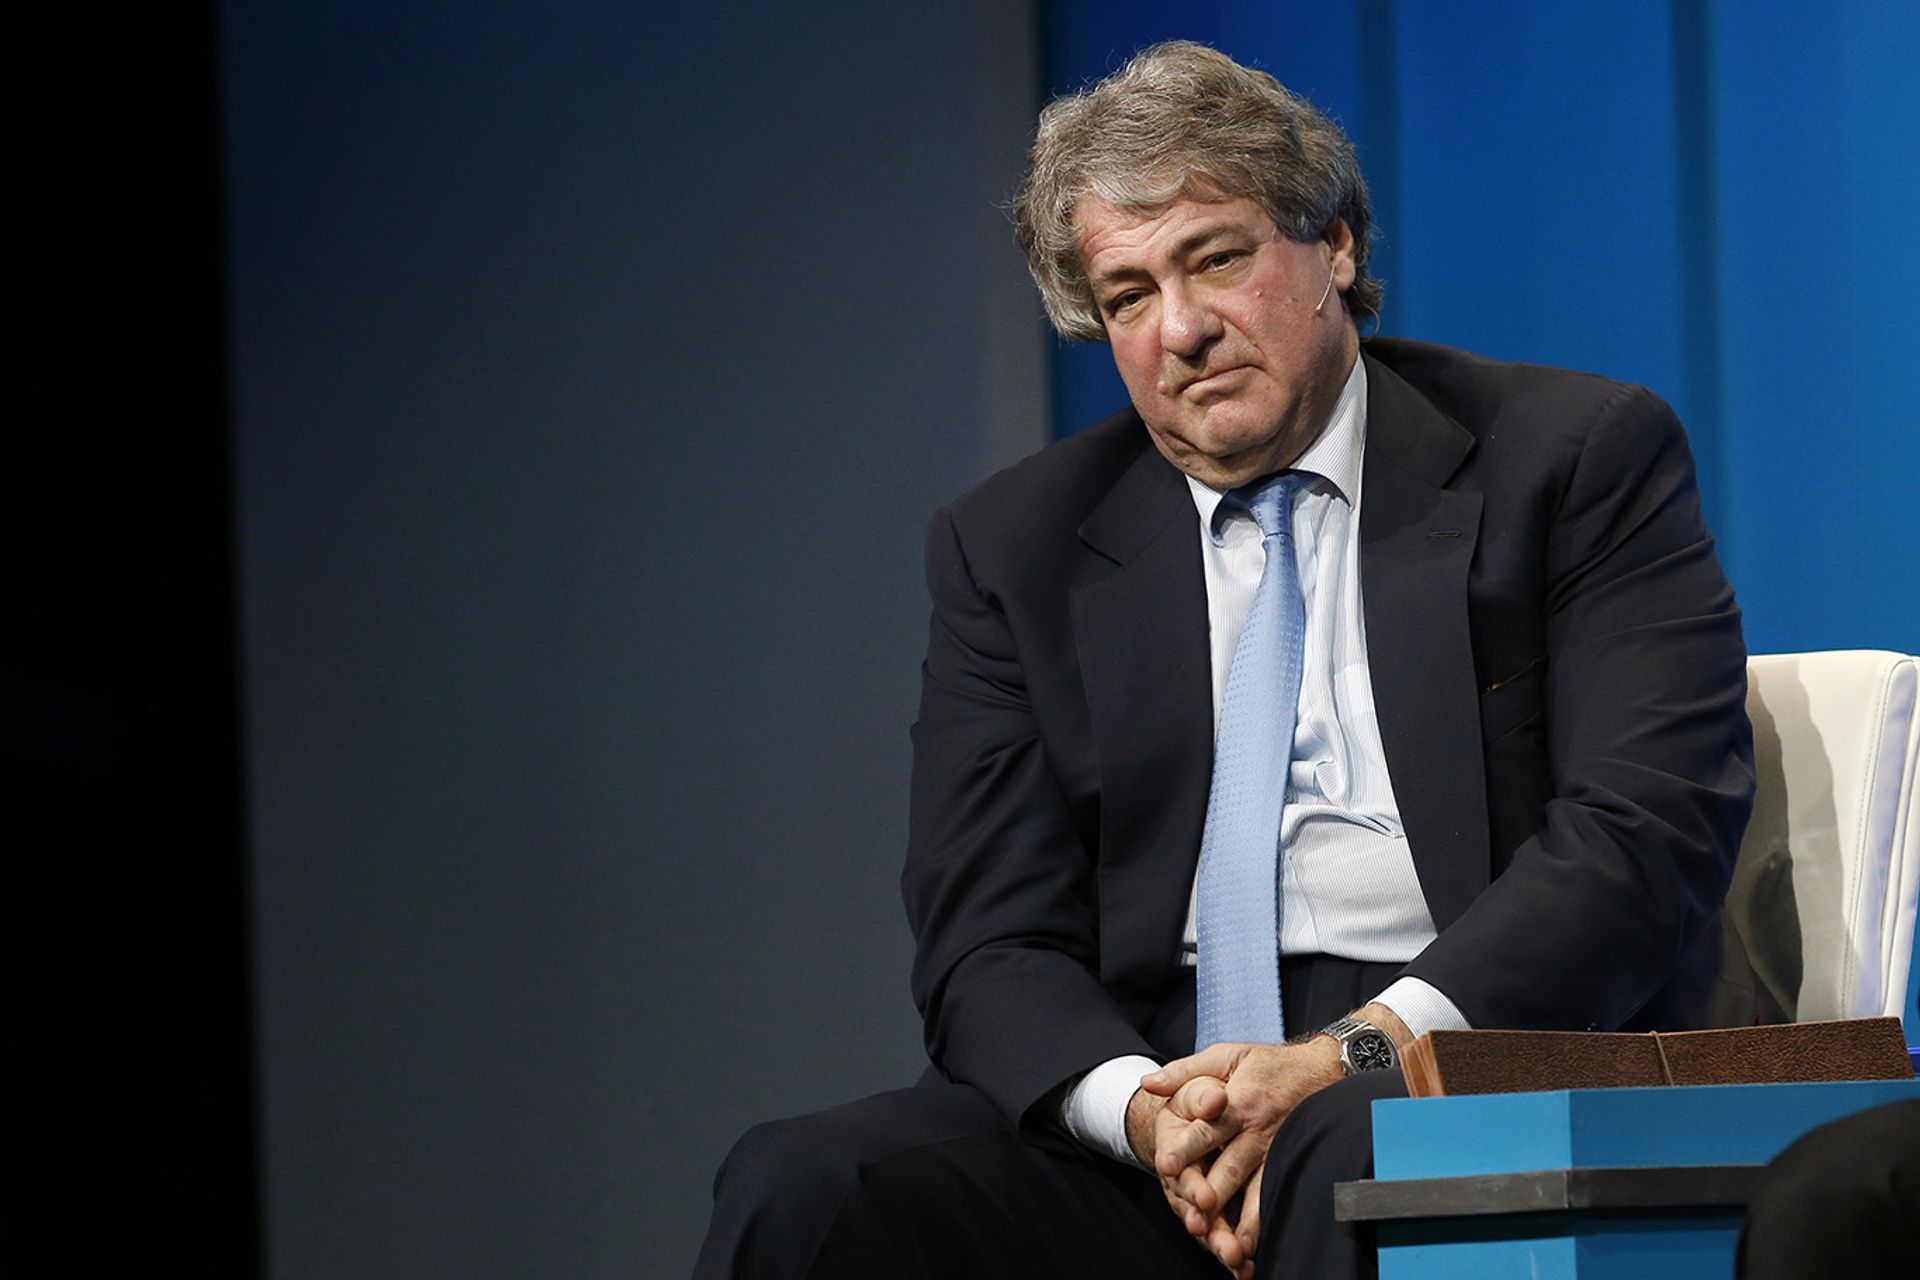 Leon Black, the billionaire board chairman of the Museum of Modern Art, in 2015 Getty Images